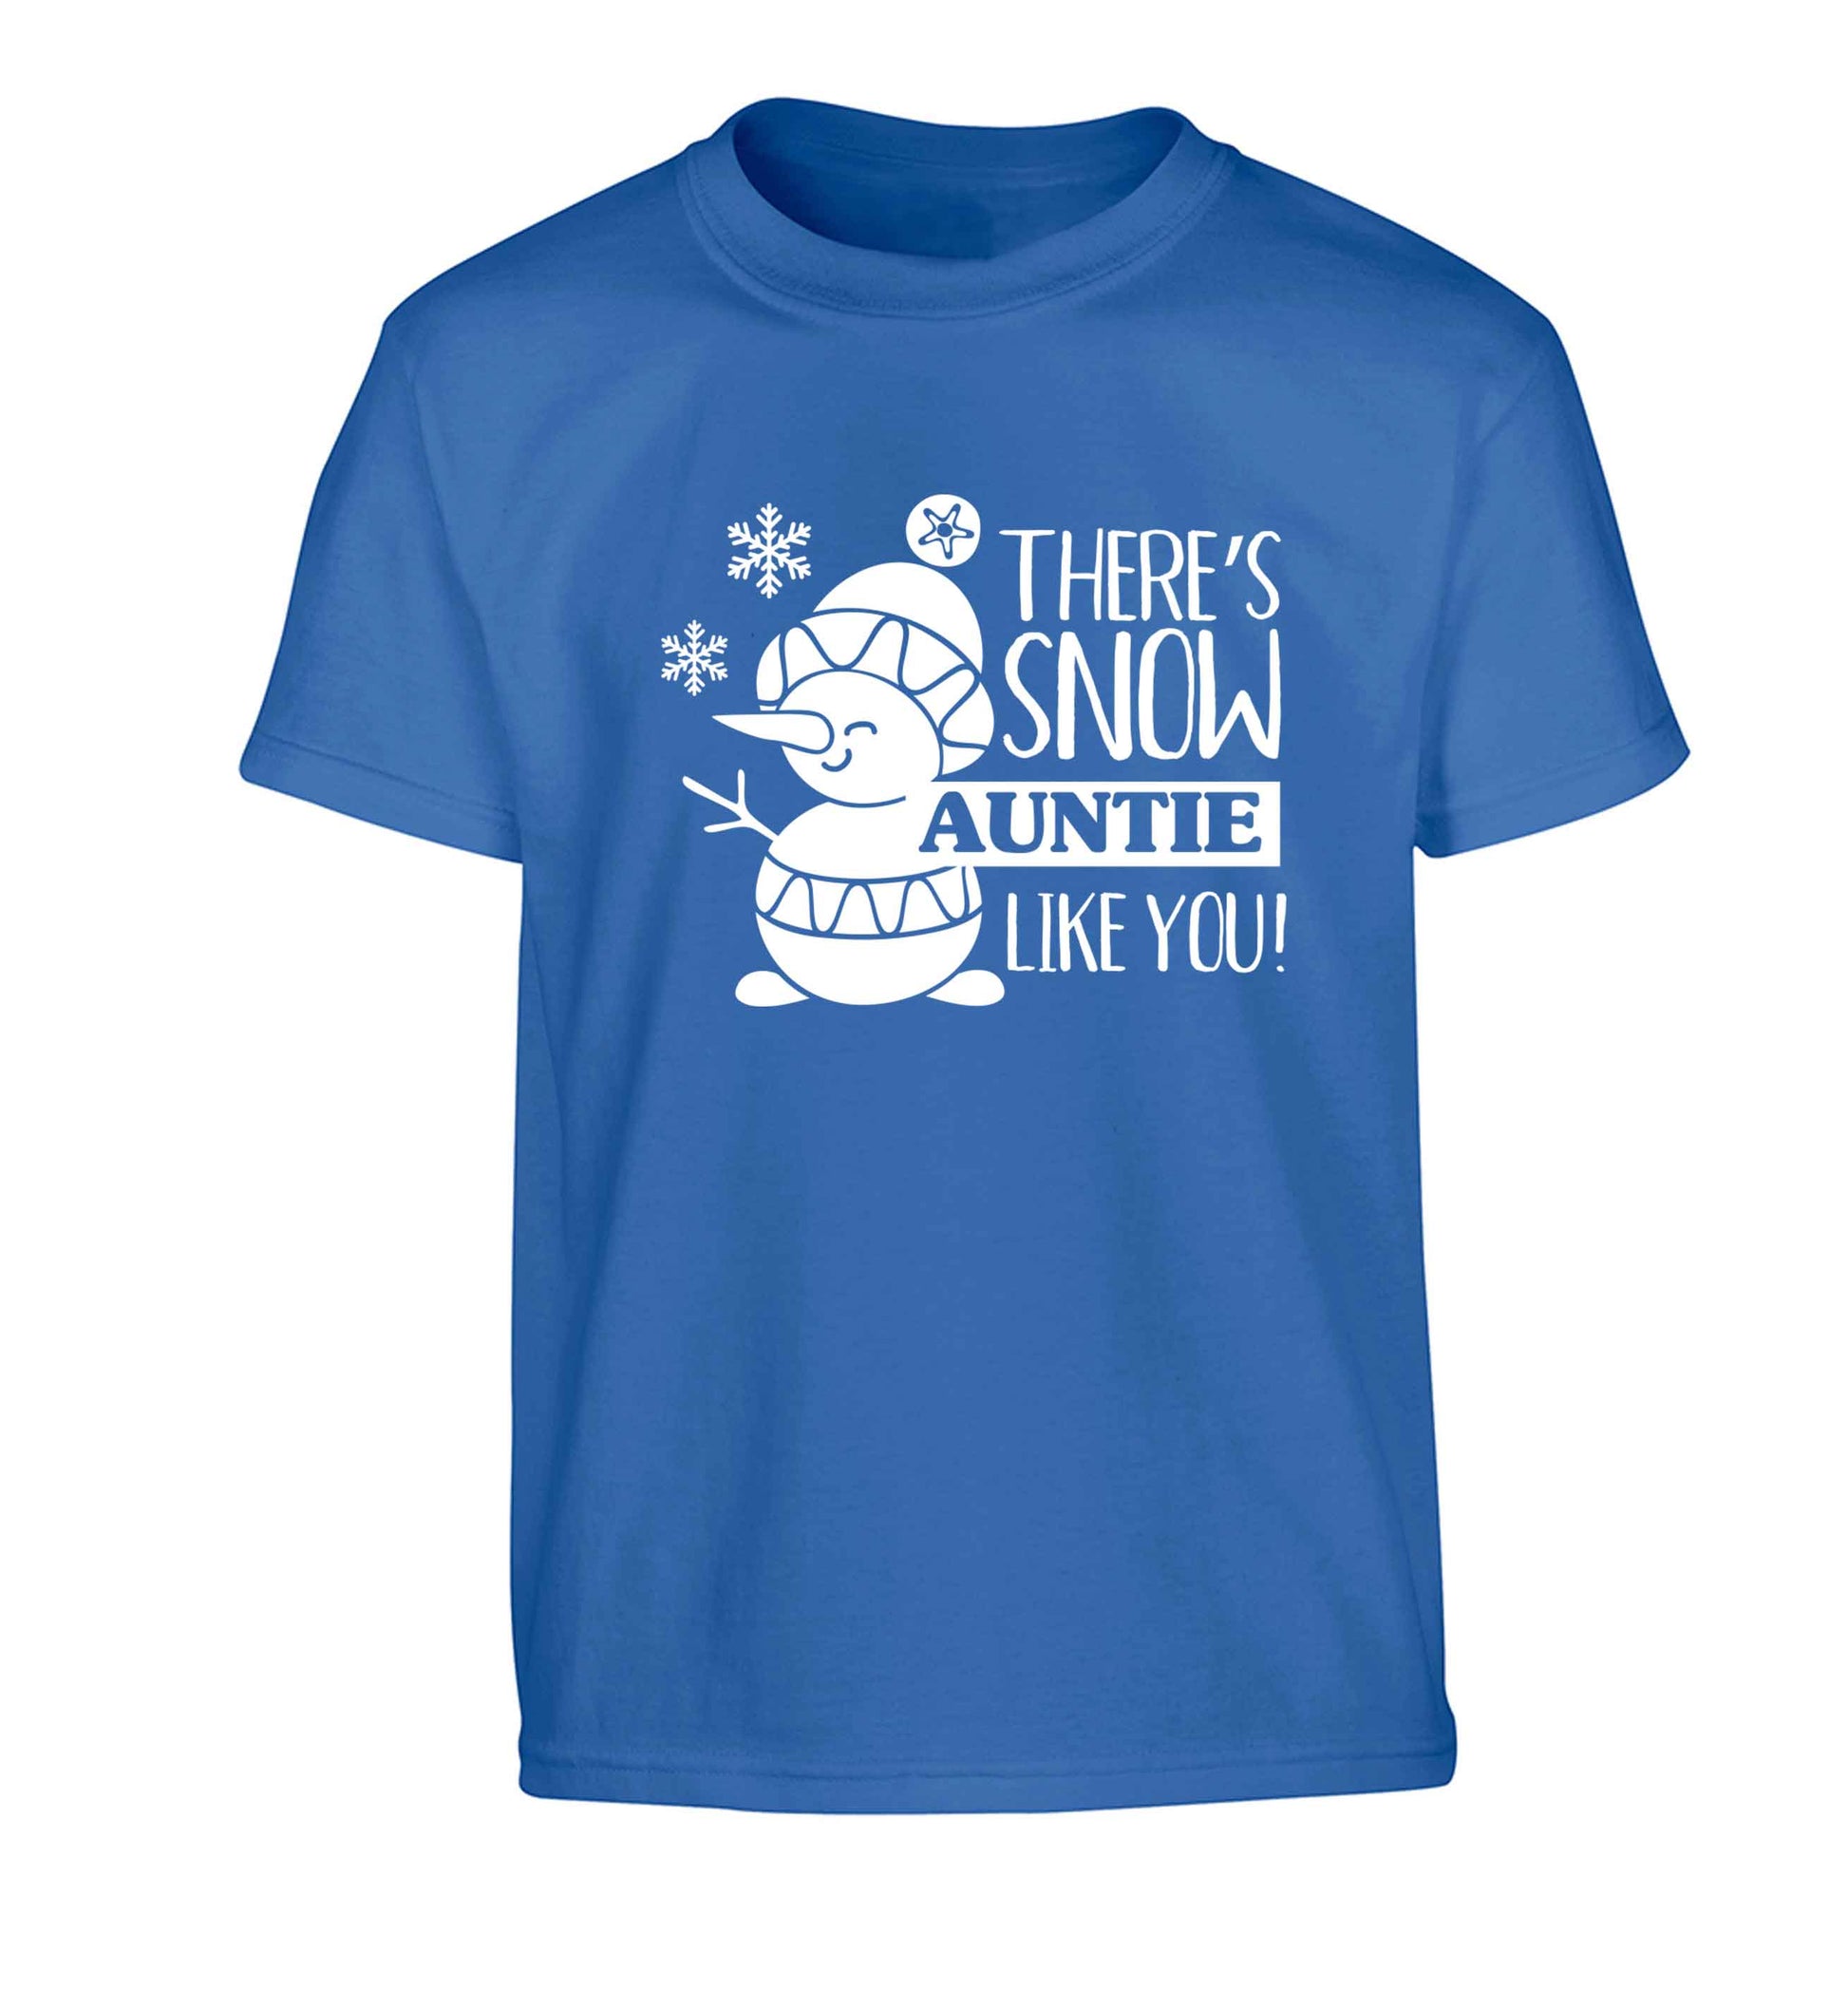 There's snow auntie like you Children's blue Tshirt 12-13 Years